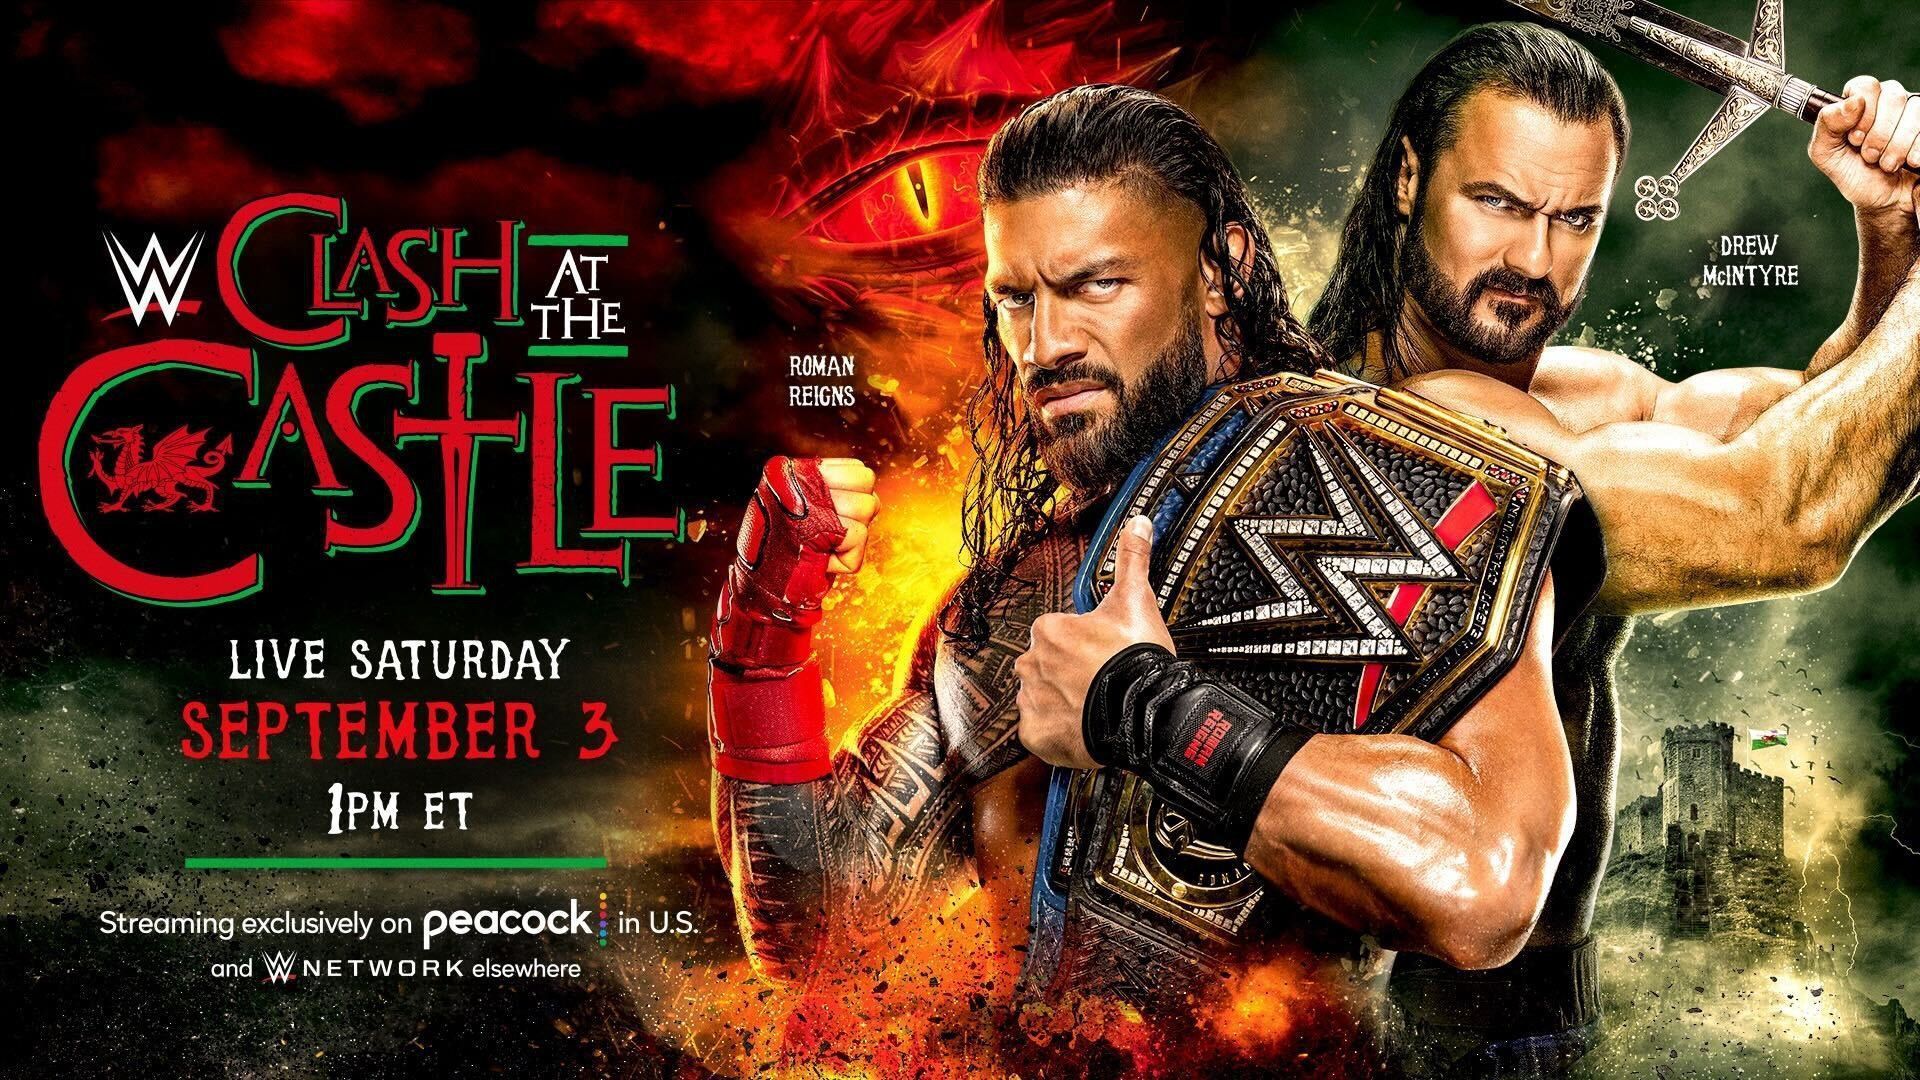 WWE Clash at the Castle poster featuring Drew McIntyre &amp; Roman Reigns